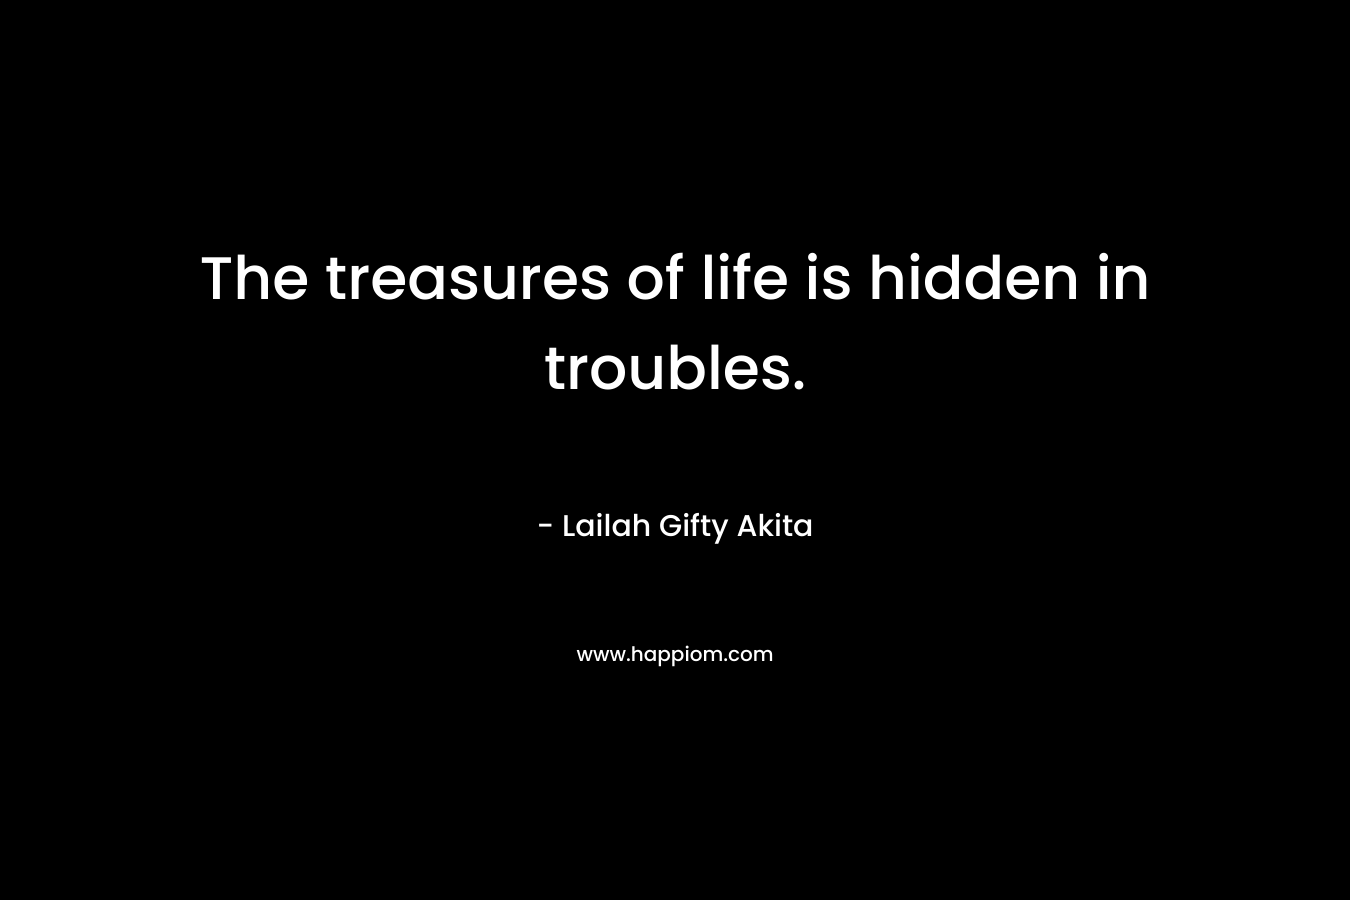 The treasures of life is hidden in troubles. – Lailah Gifty Akita